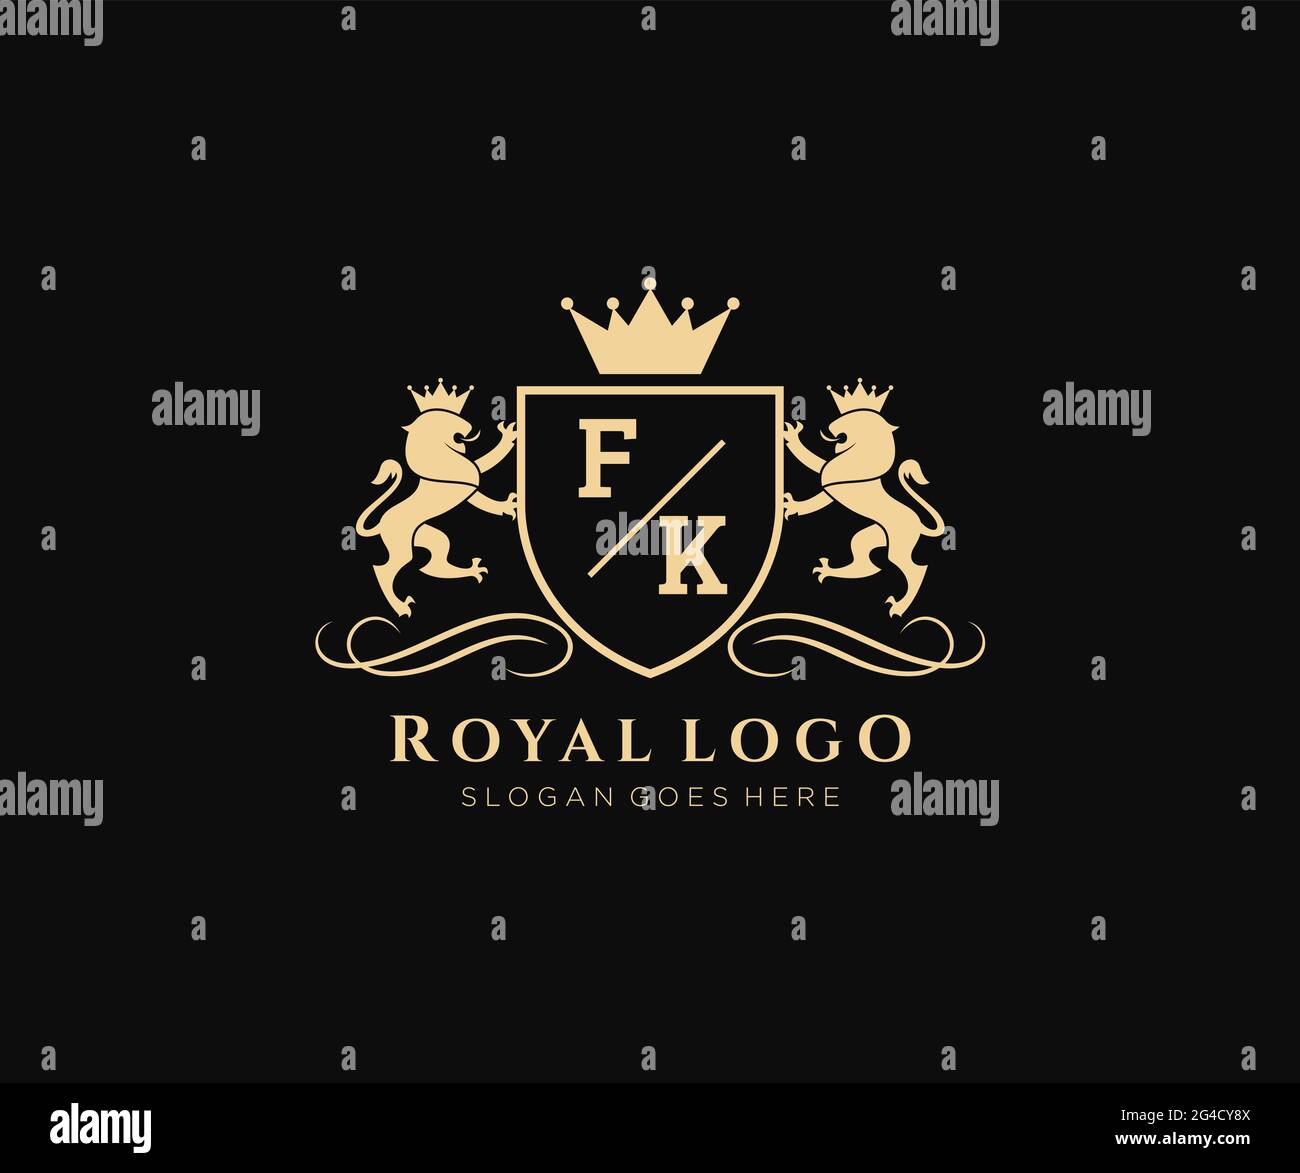 FK Letter Lion Royal Luxury Heraldic,Crest Logo template in vector art for Restaurant, Royalty, Boutique, Cafe, Hotel, Heraldic, Jewelry, Fashion and Stock Vector